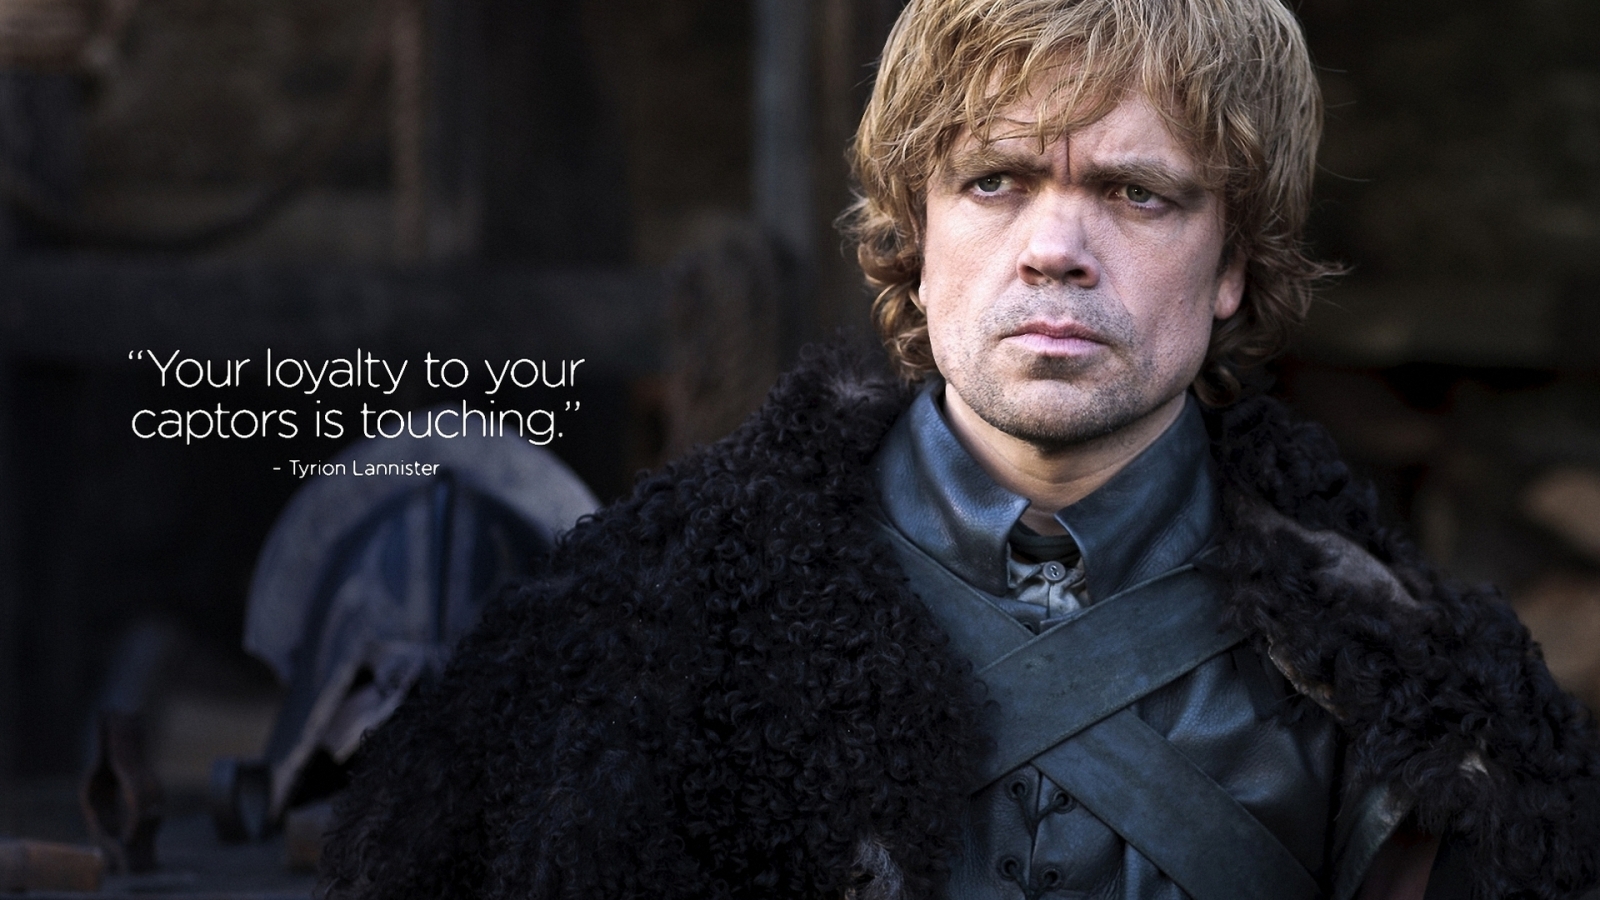 Tyrion Lannister Quote Game of Thrones for 1600 x 900 HDTV resolution